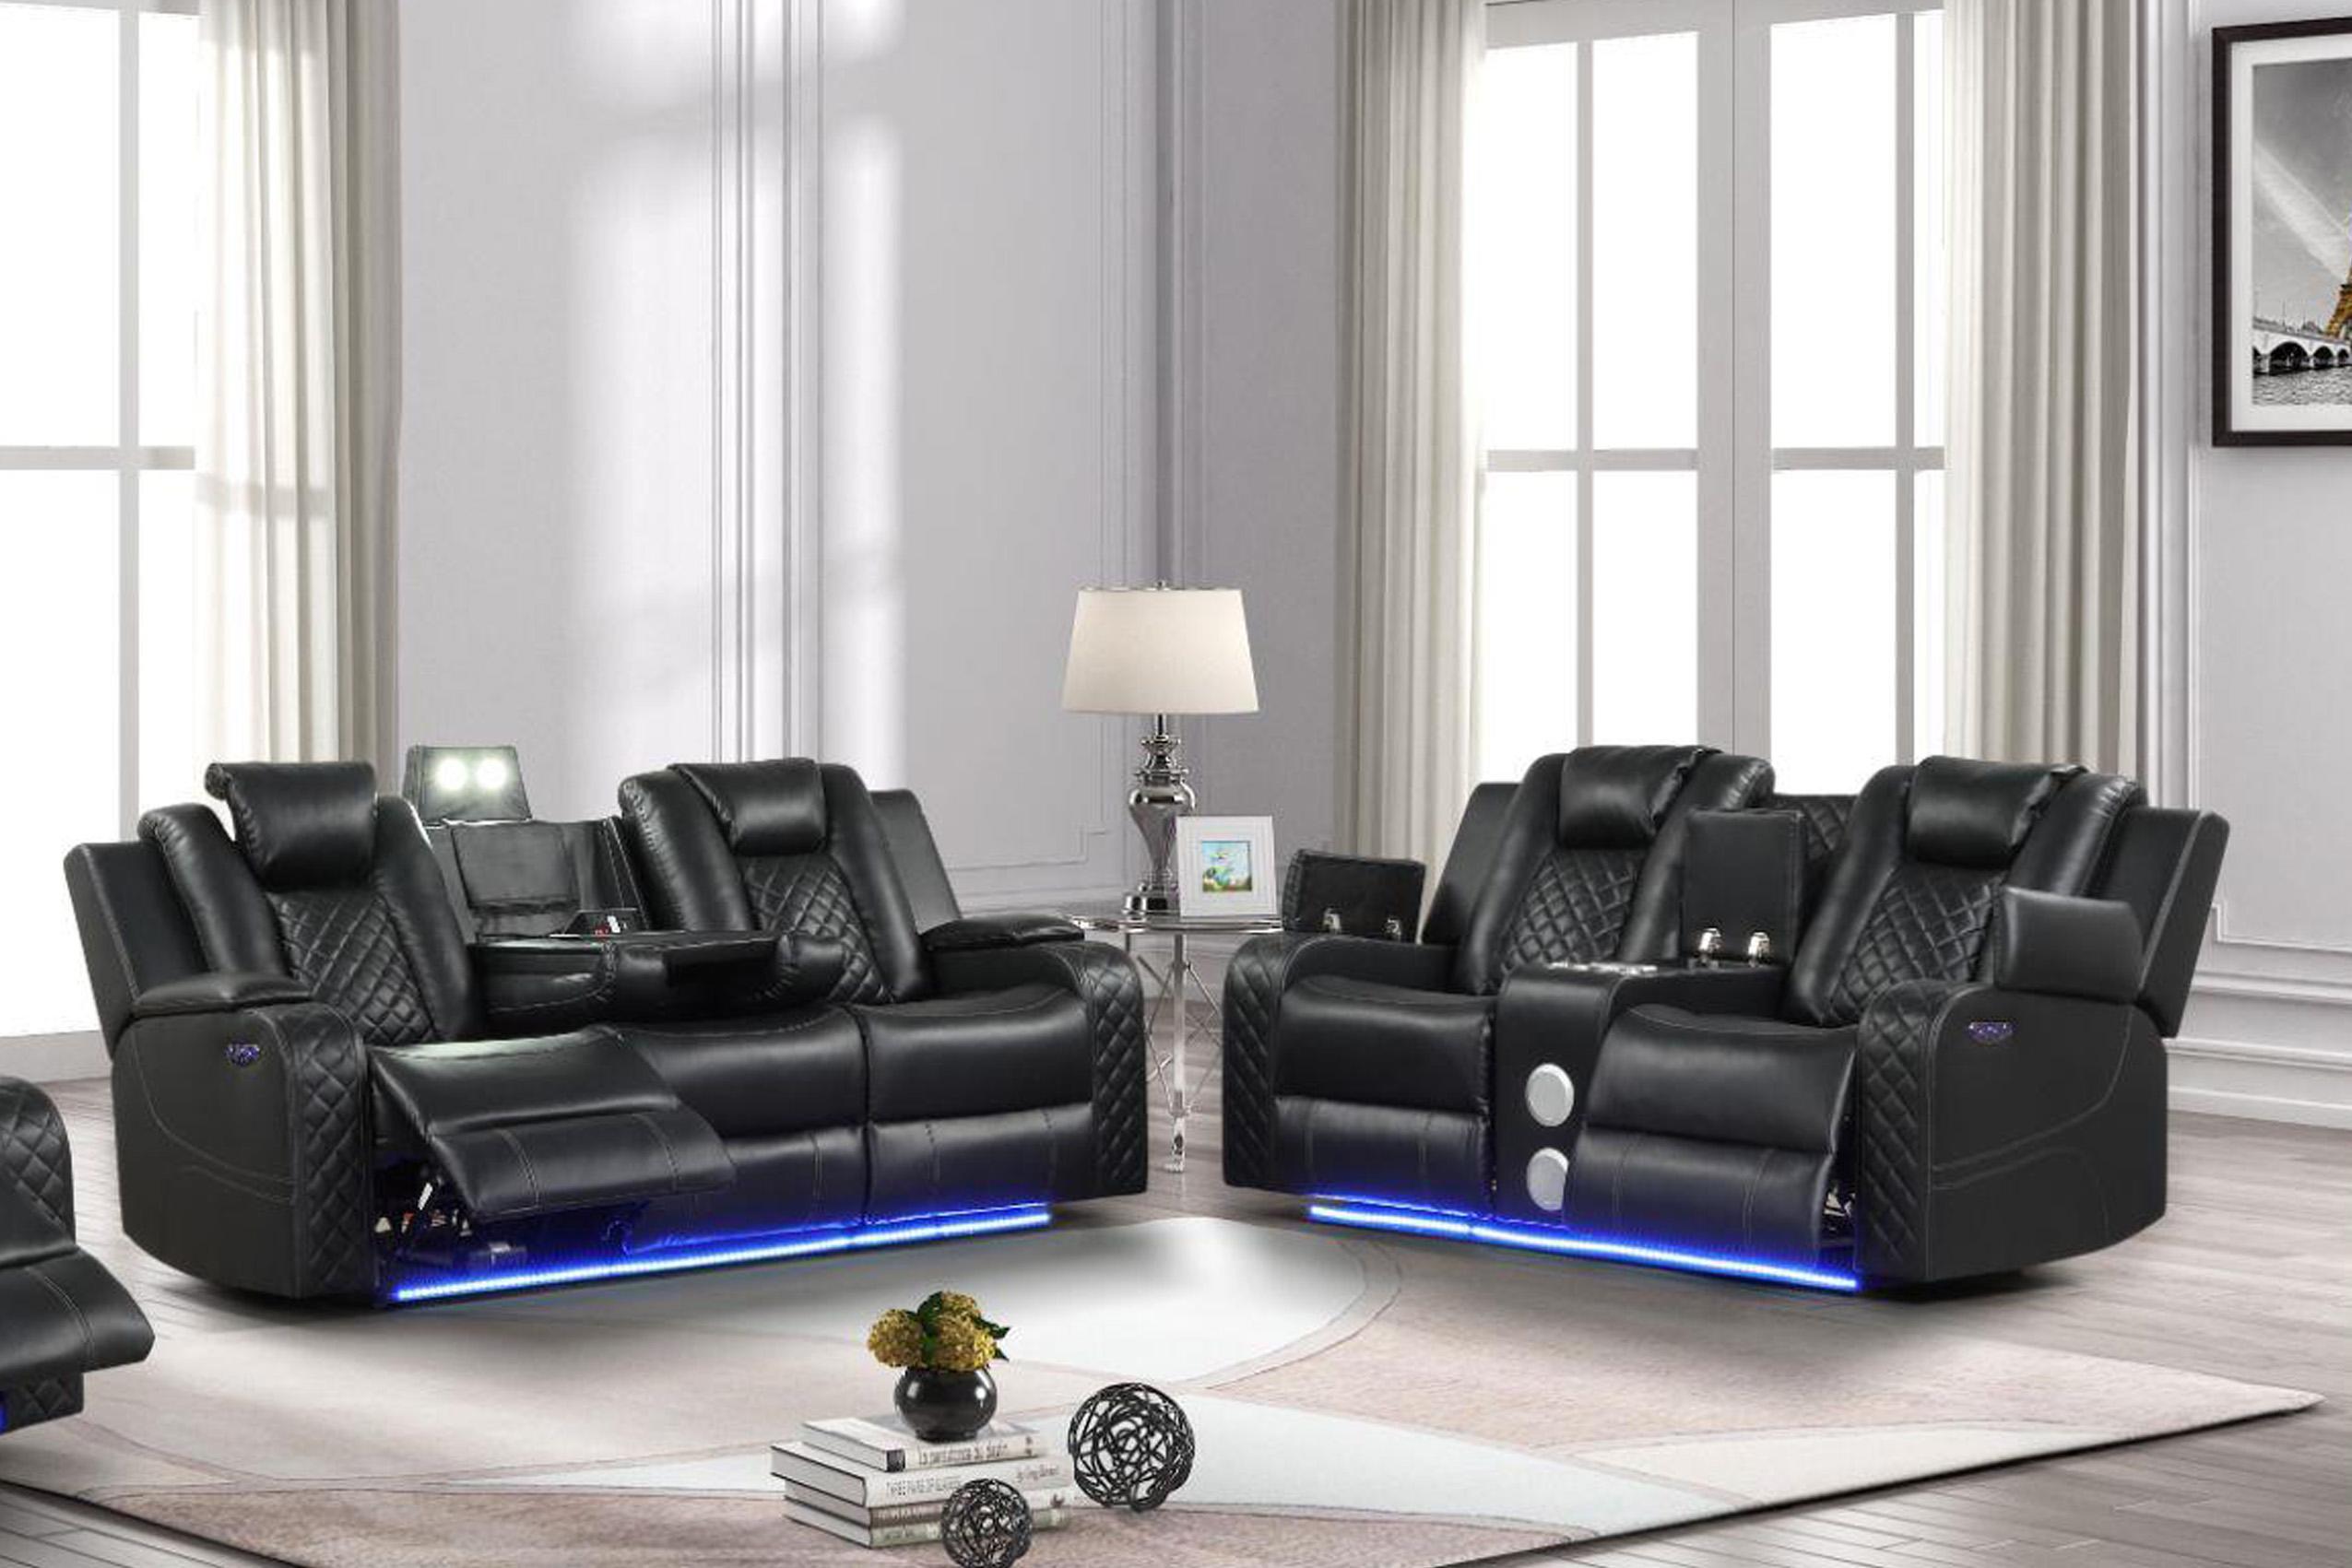 

    
Black Faux Leather Power Recliner Sofa Set 2Pcs BENZ Galaxy Home Contemporary
